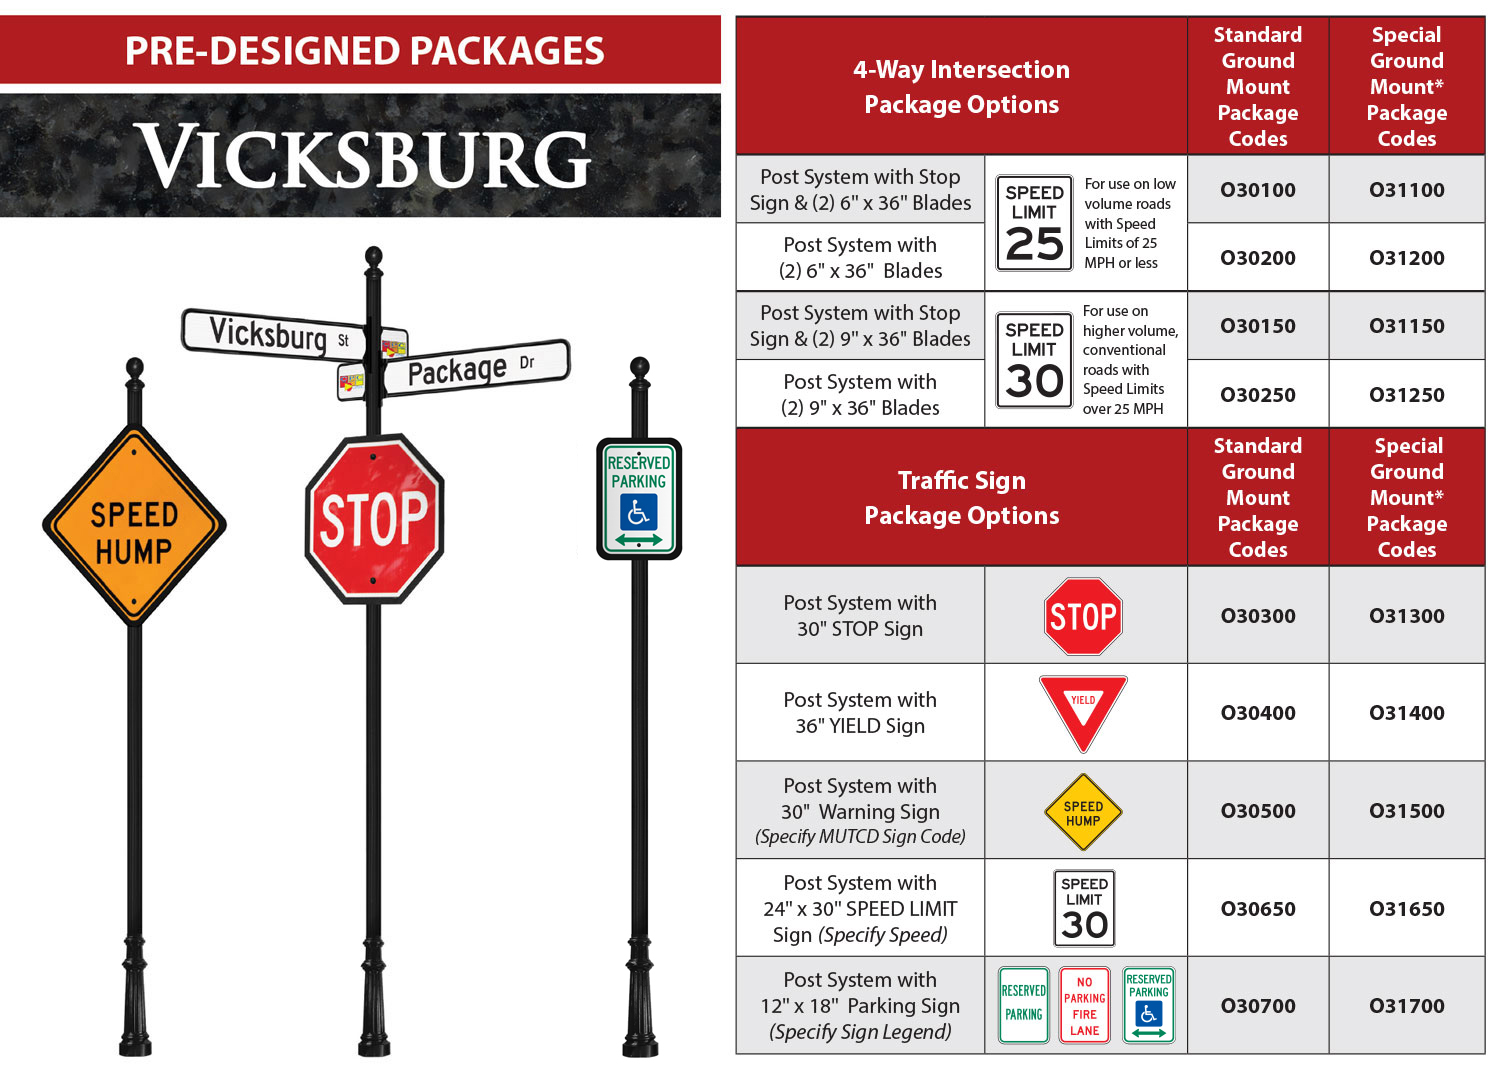 Vicksburg Post and Sign Packages Overview